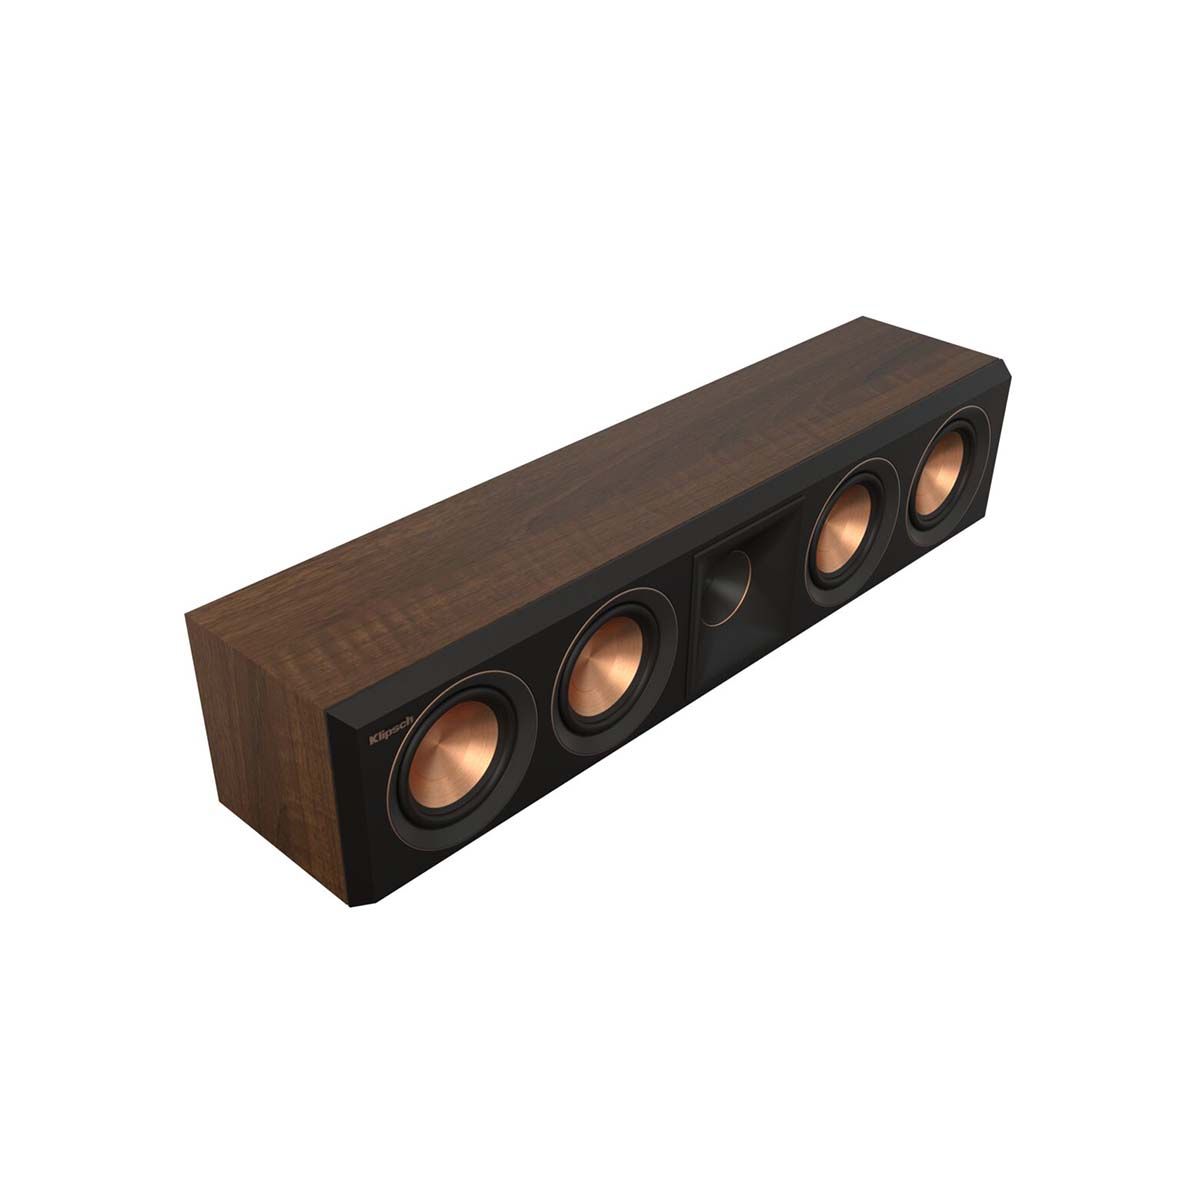 Klipsch RP-404C II Center Channel Speaker - Walnut - angled front view without grill